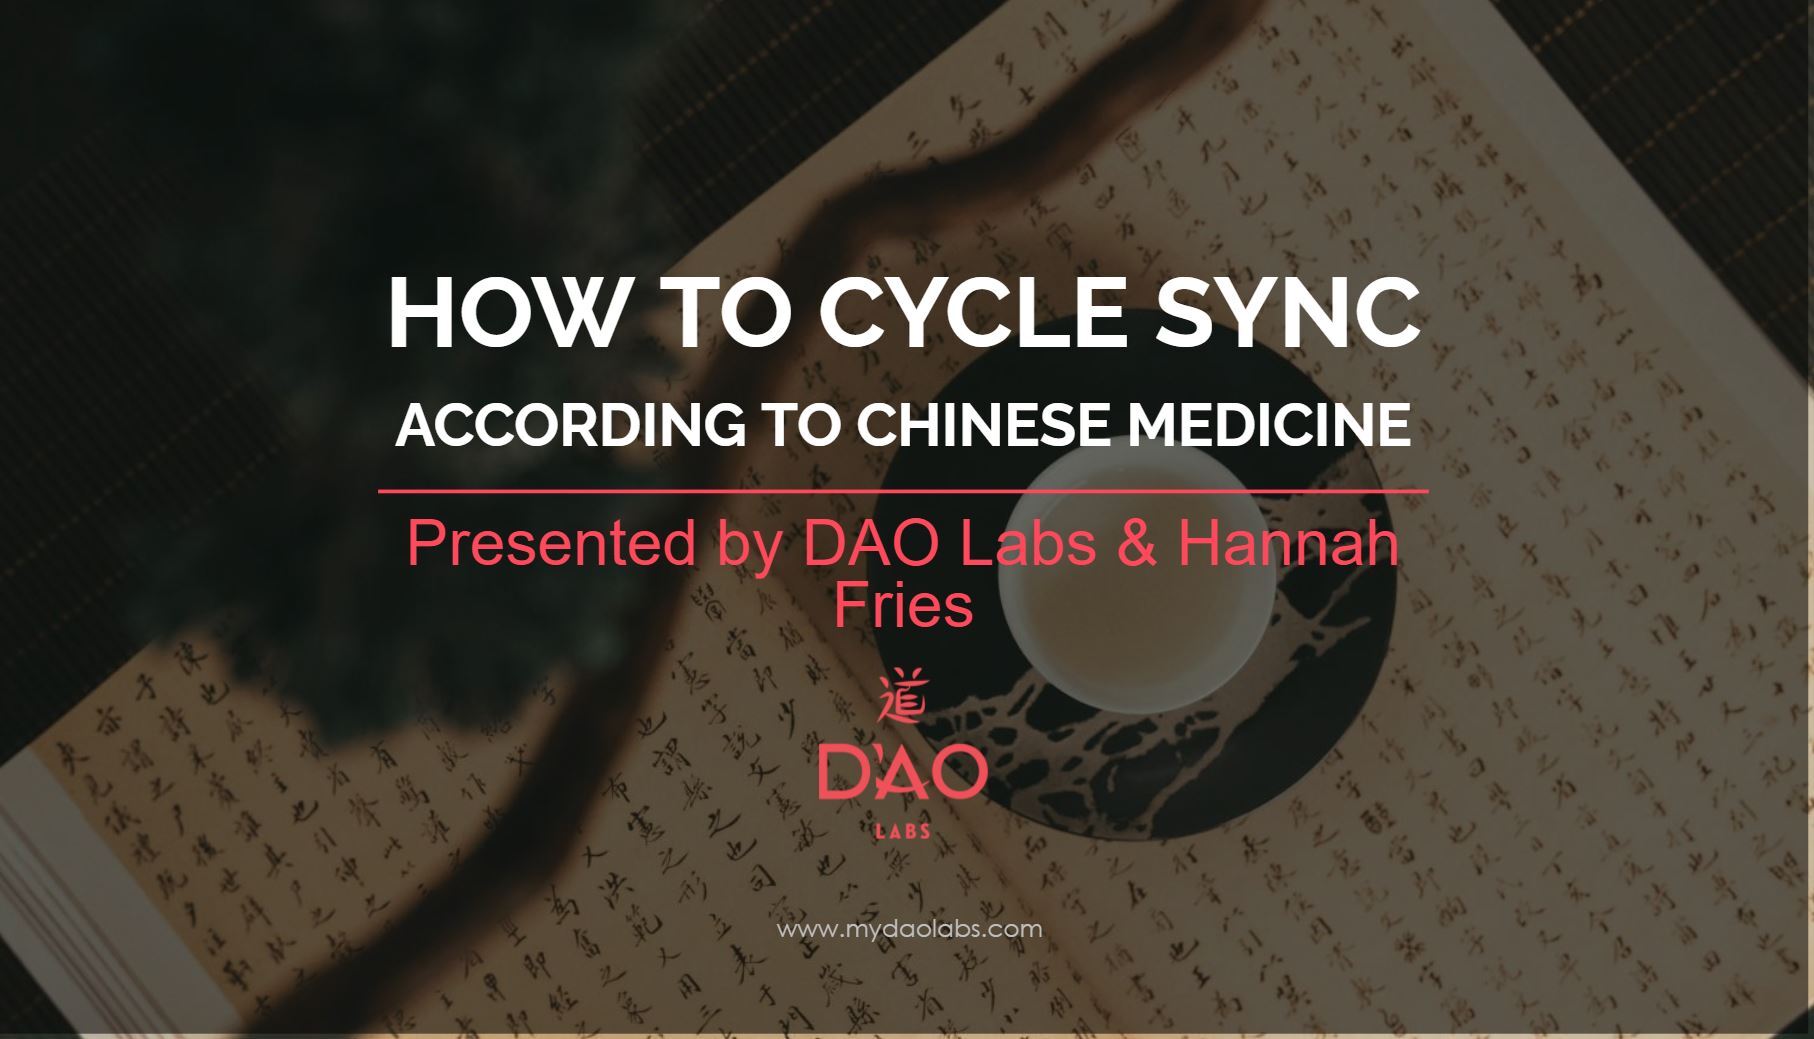 How to "Cycle Sync" with the Wisdom of Traditional Chinese Medicine